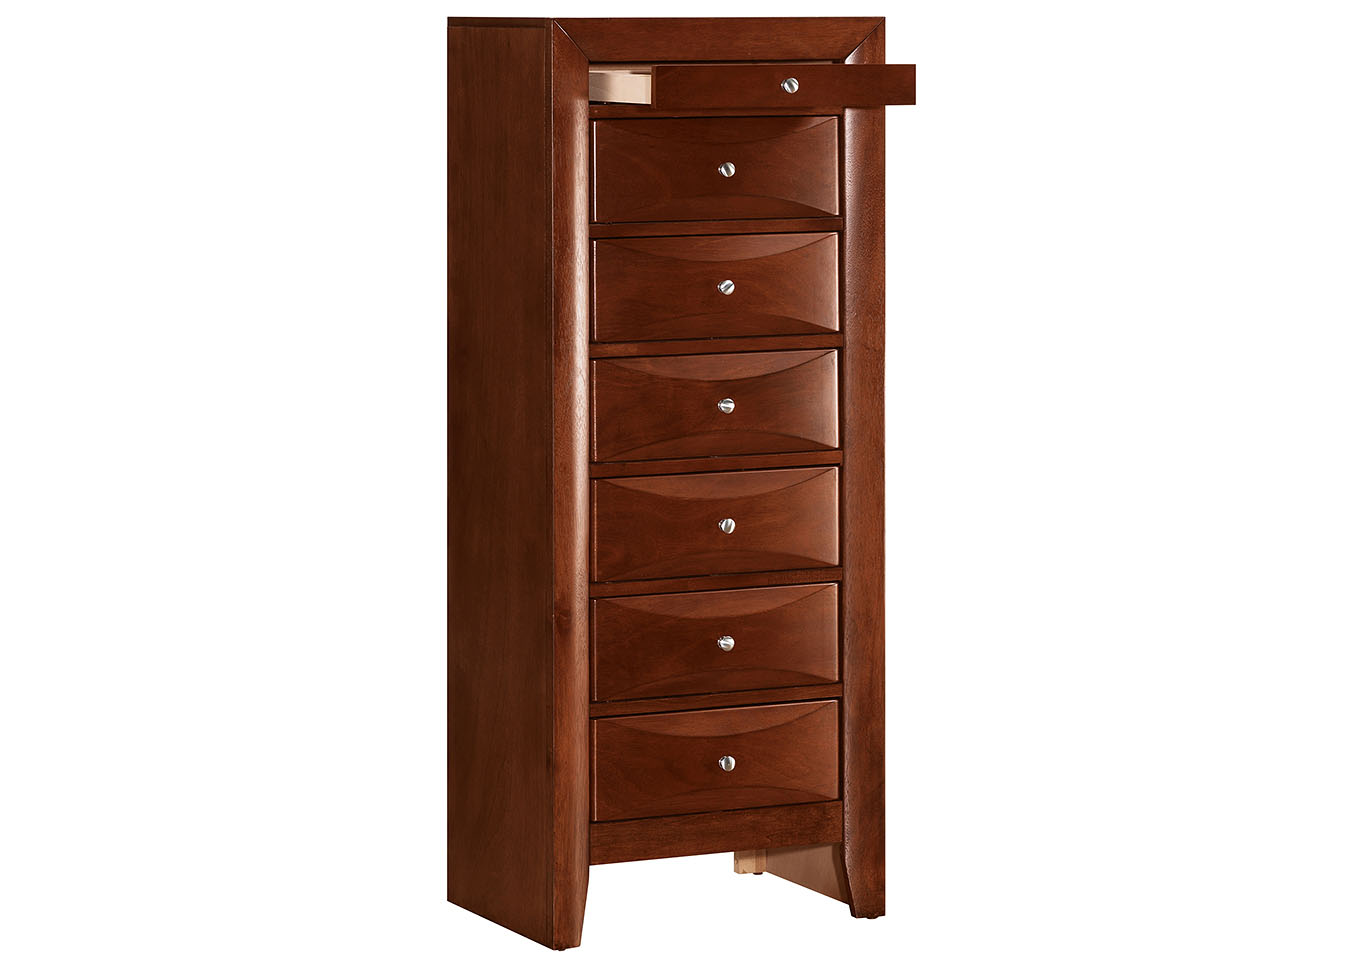 Cherry 7 Drawer Lingerie Chest,Glory Furniture